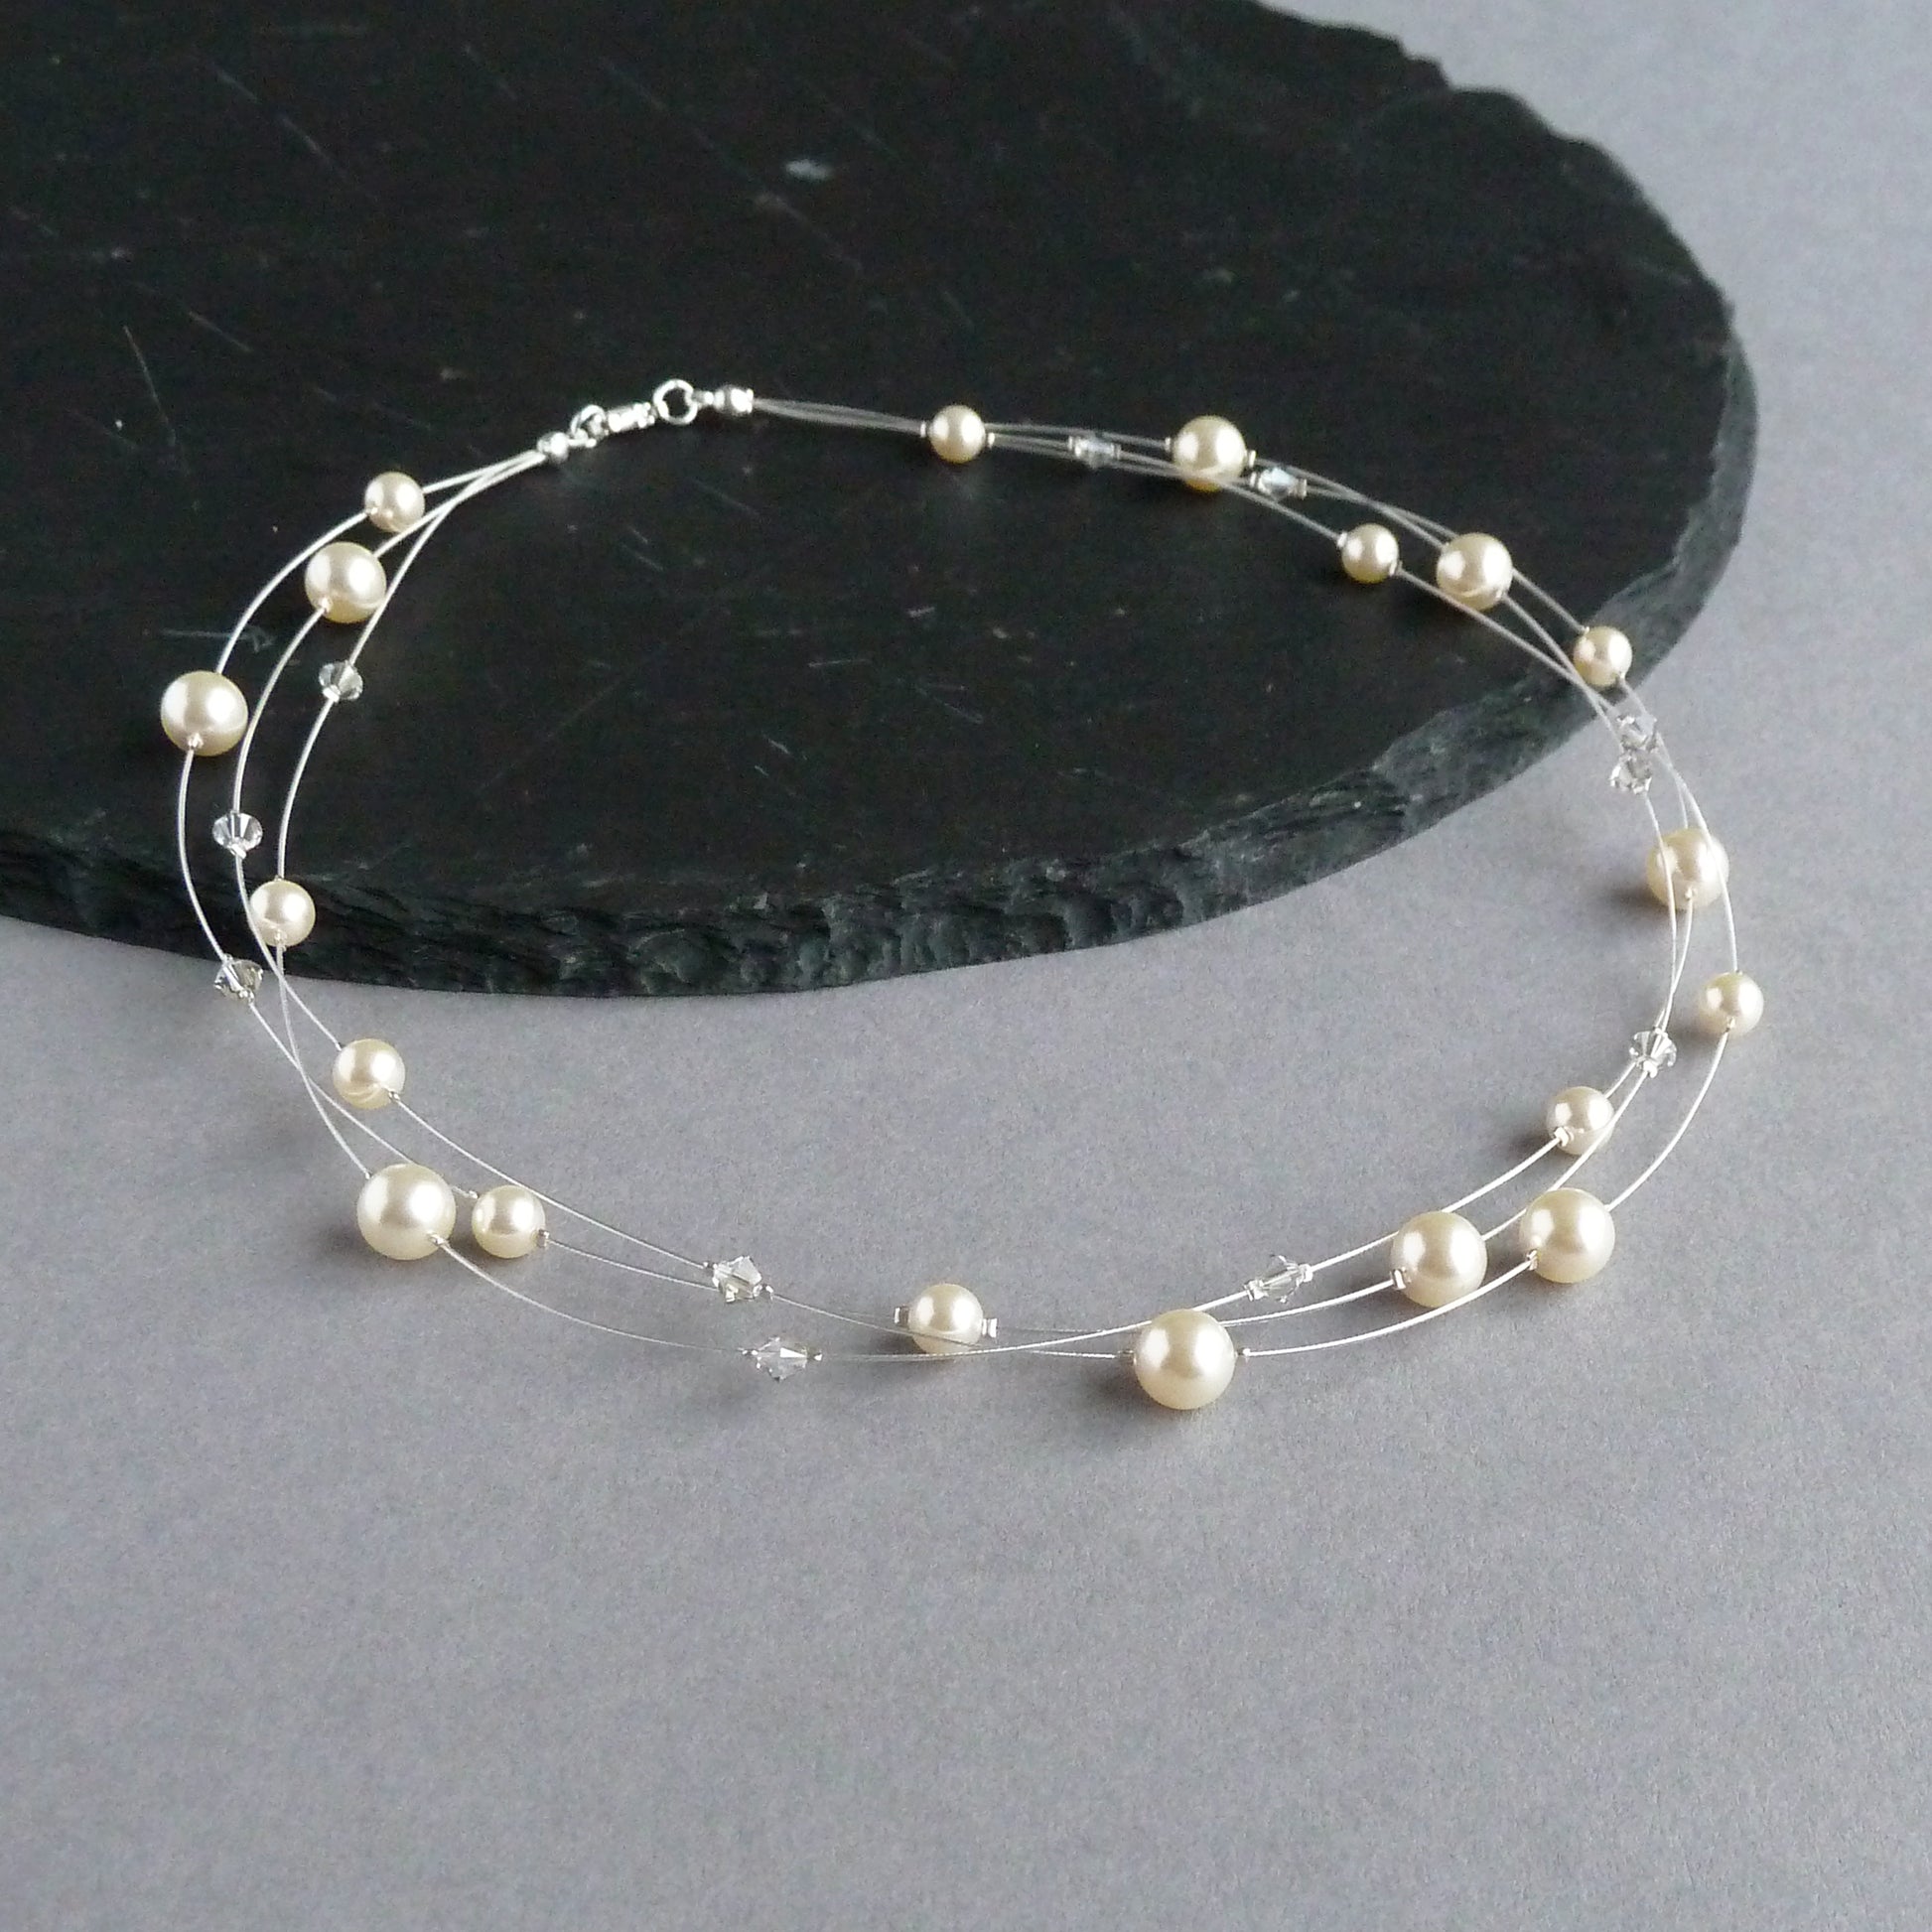 Cream floating pearl necklace